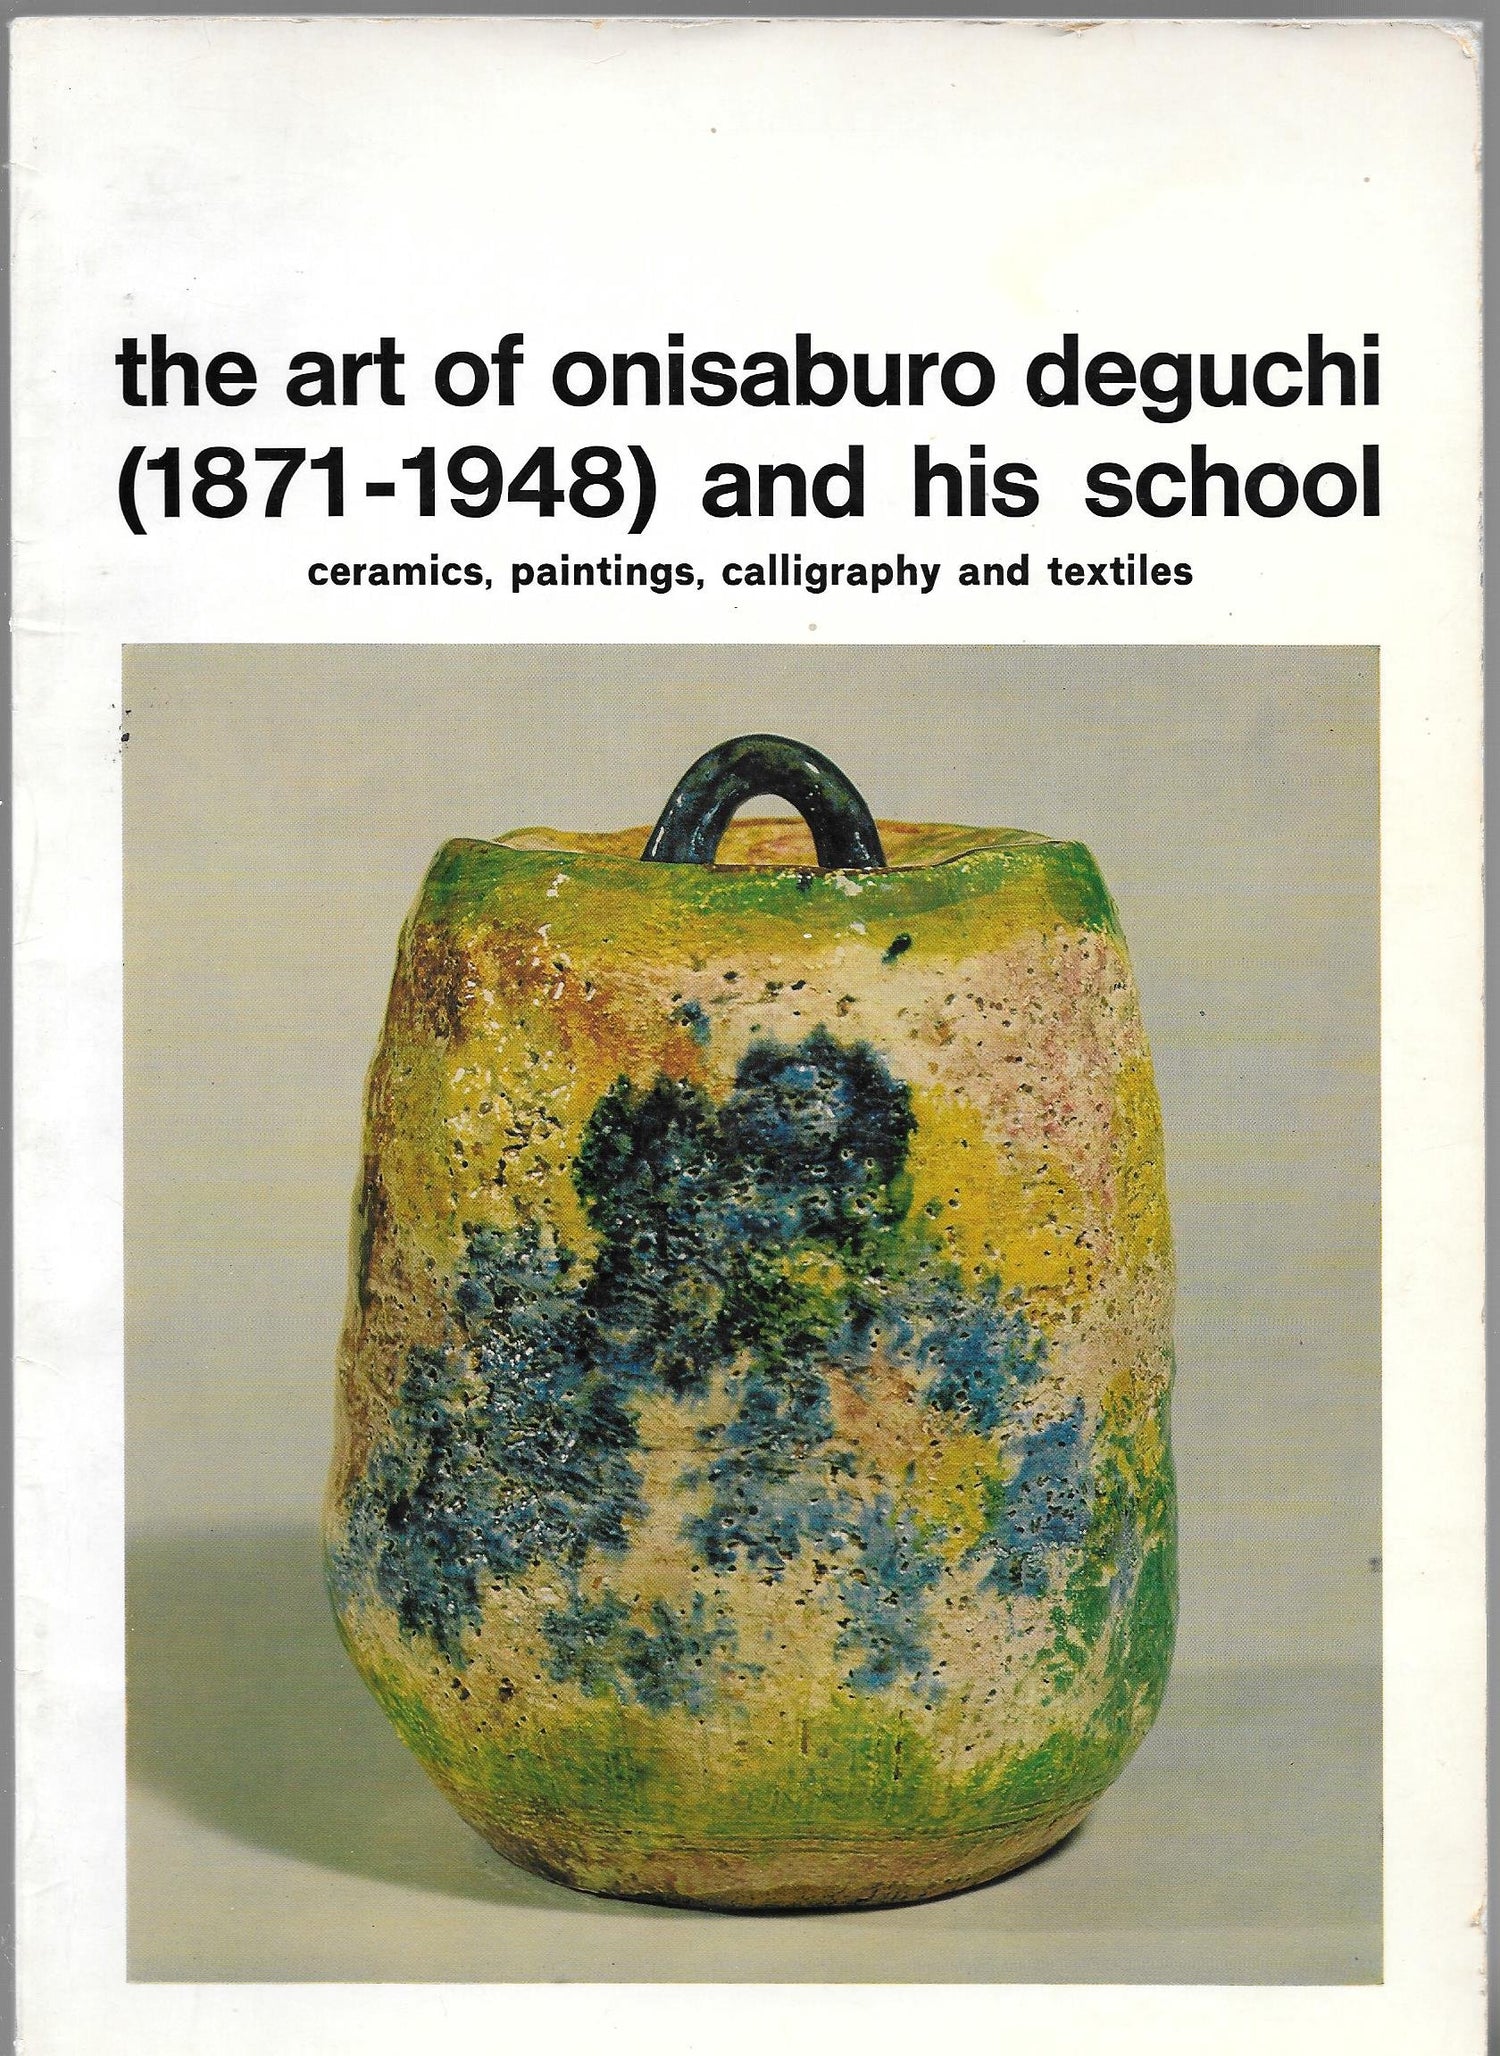 The art of Onisaburo Deguchi (1871-1948) and his school: Ceramics, paintings, calligraphy and textiles Book (Preowned) - Budovideos Inc